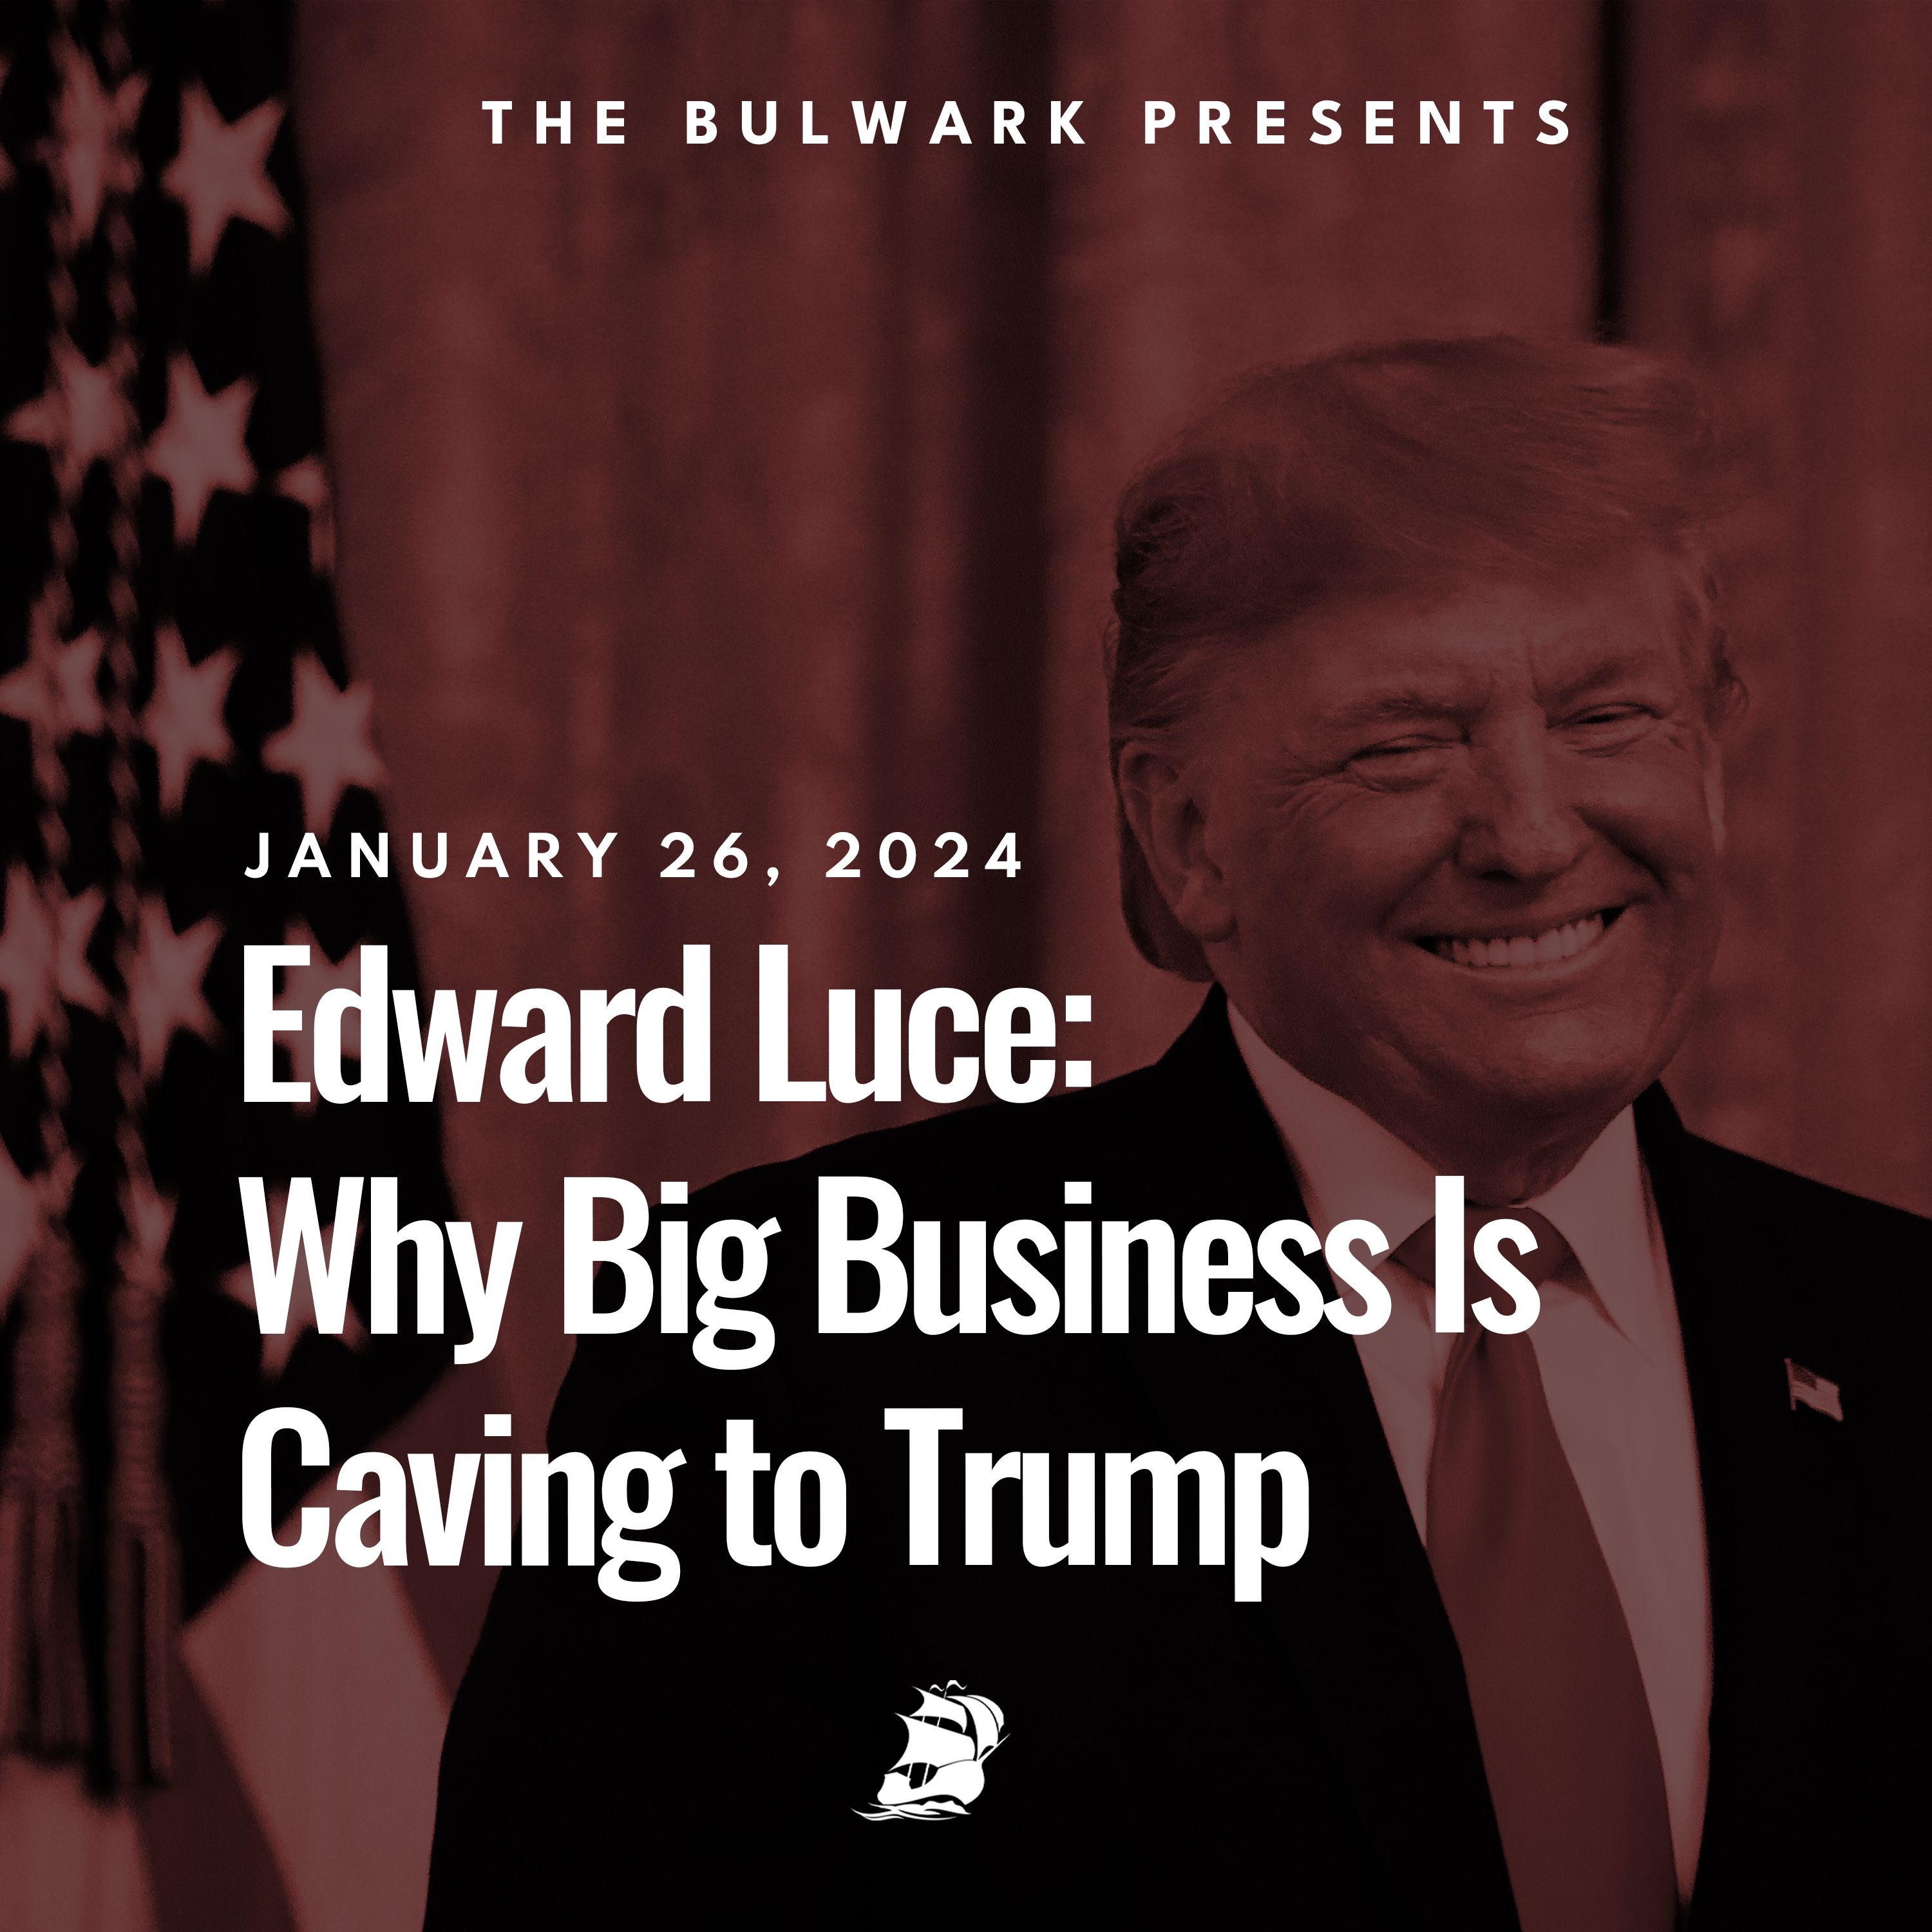 Edward Luce: Why Big Business Is Caving to Trump